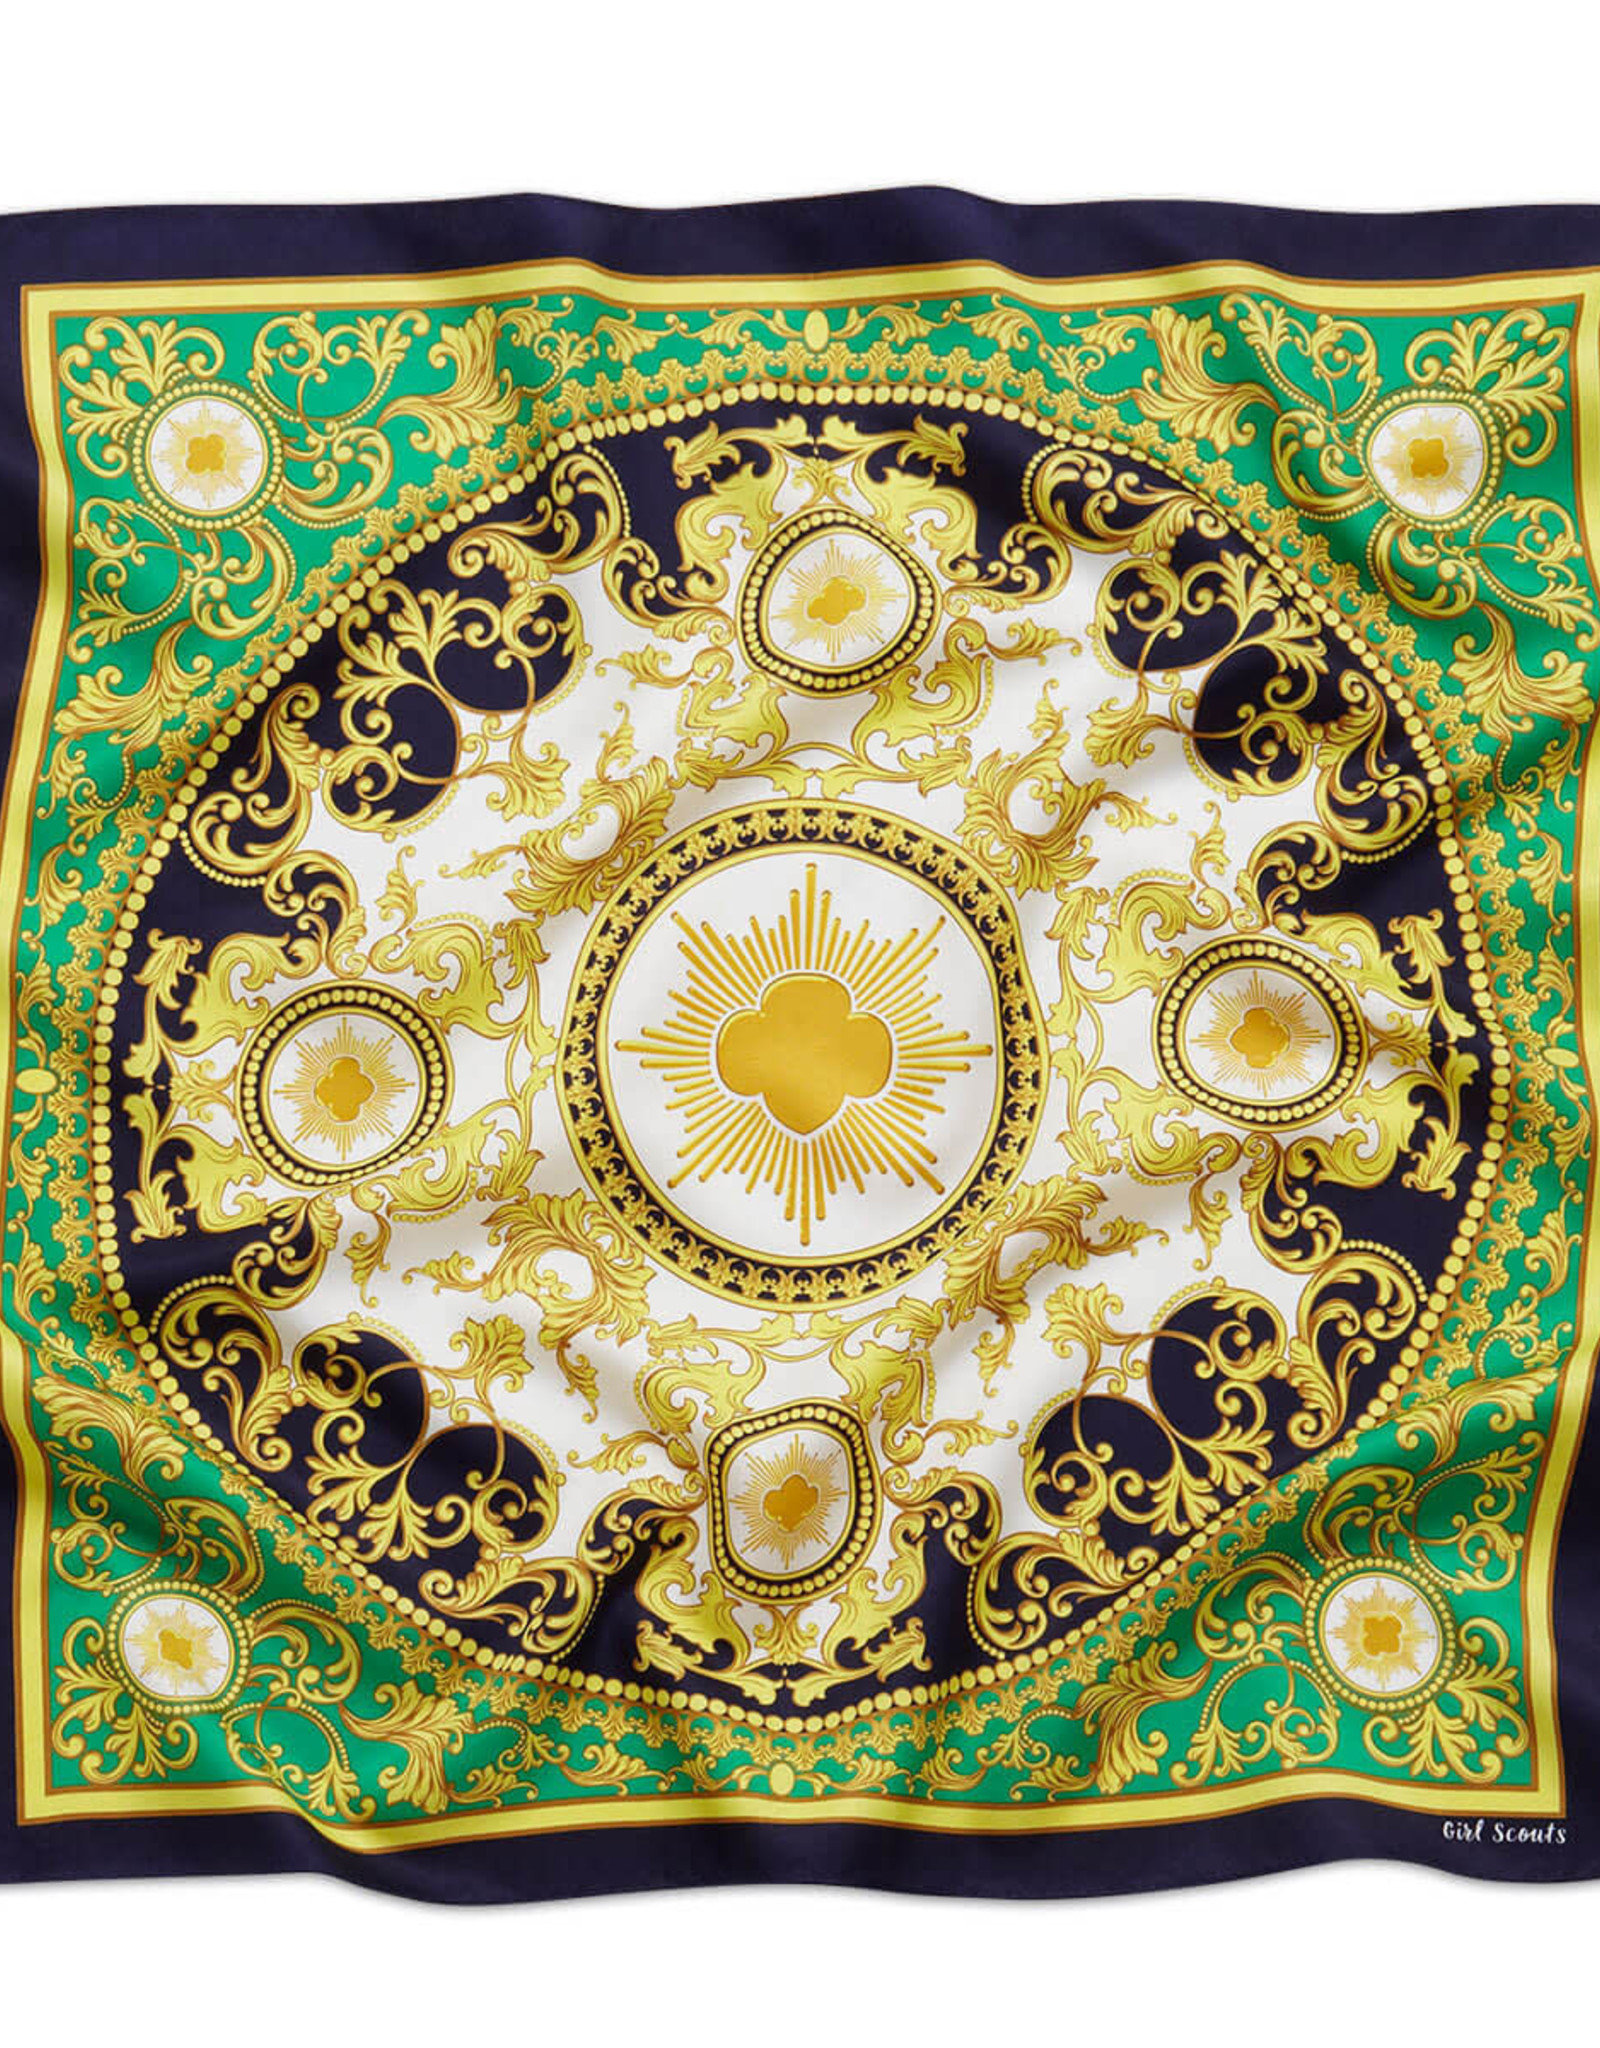 GIRL SCOUTS OF THE USA Gold Award Scarf